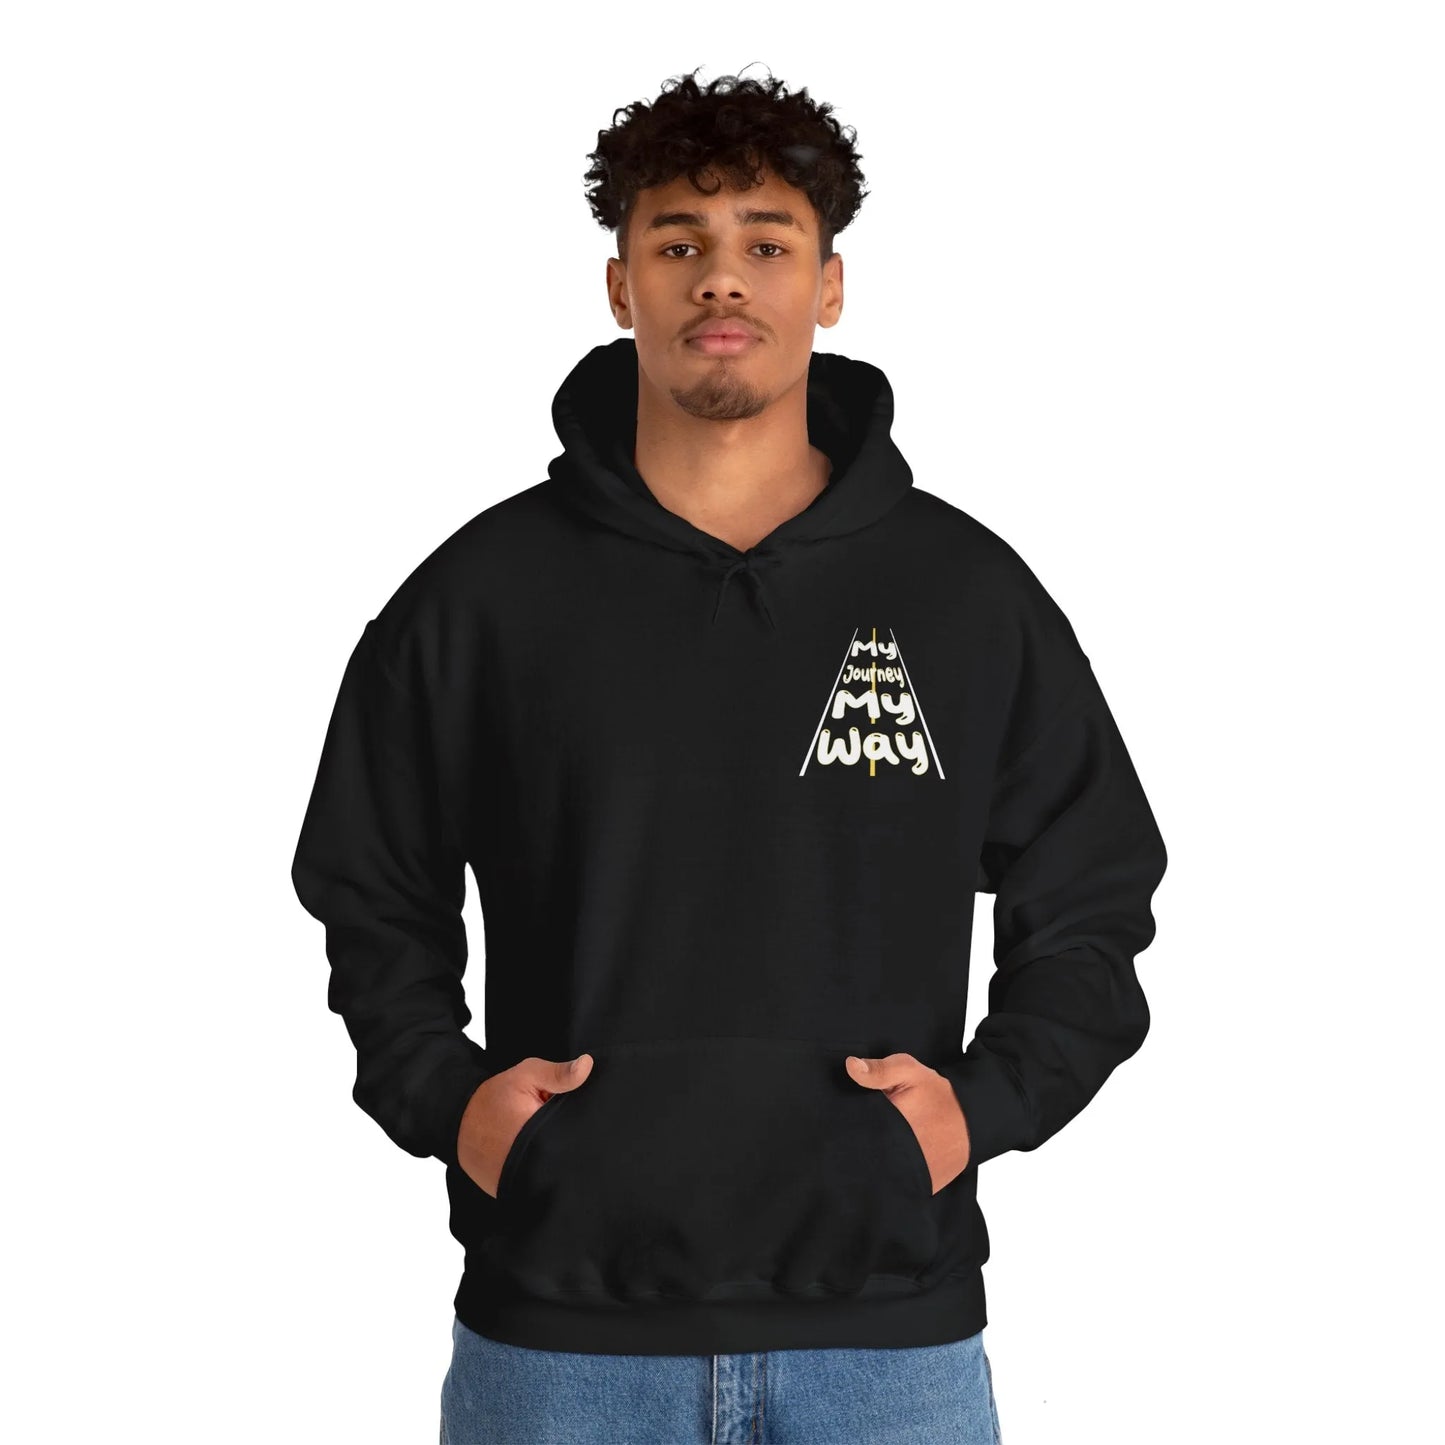 My Journey My Way: Stay In Your Lane Hooded Sweatshirt - Stay In Your Lane Sweatshirt - Trendy  Graphic Hoodie Front View Male Model